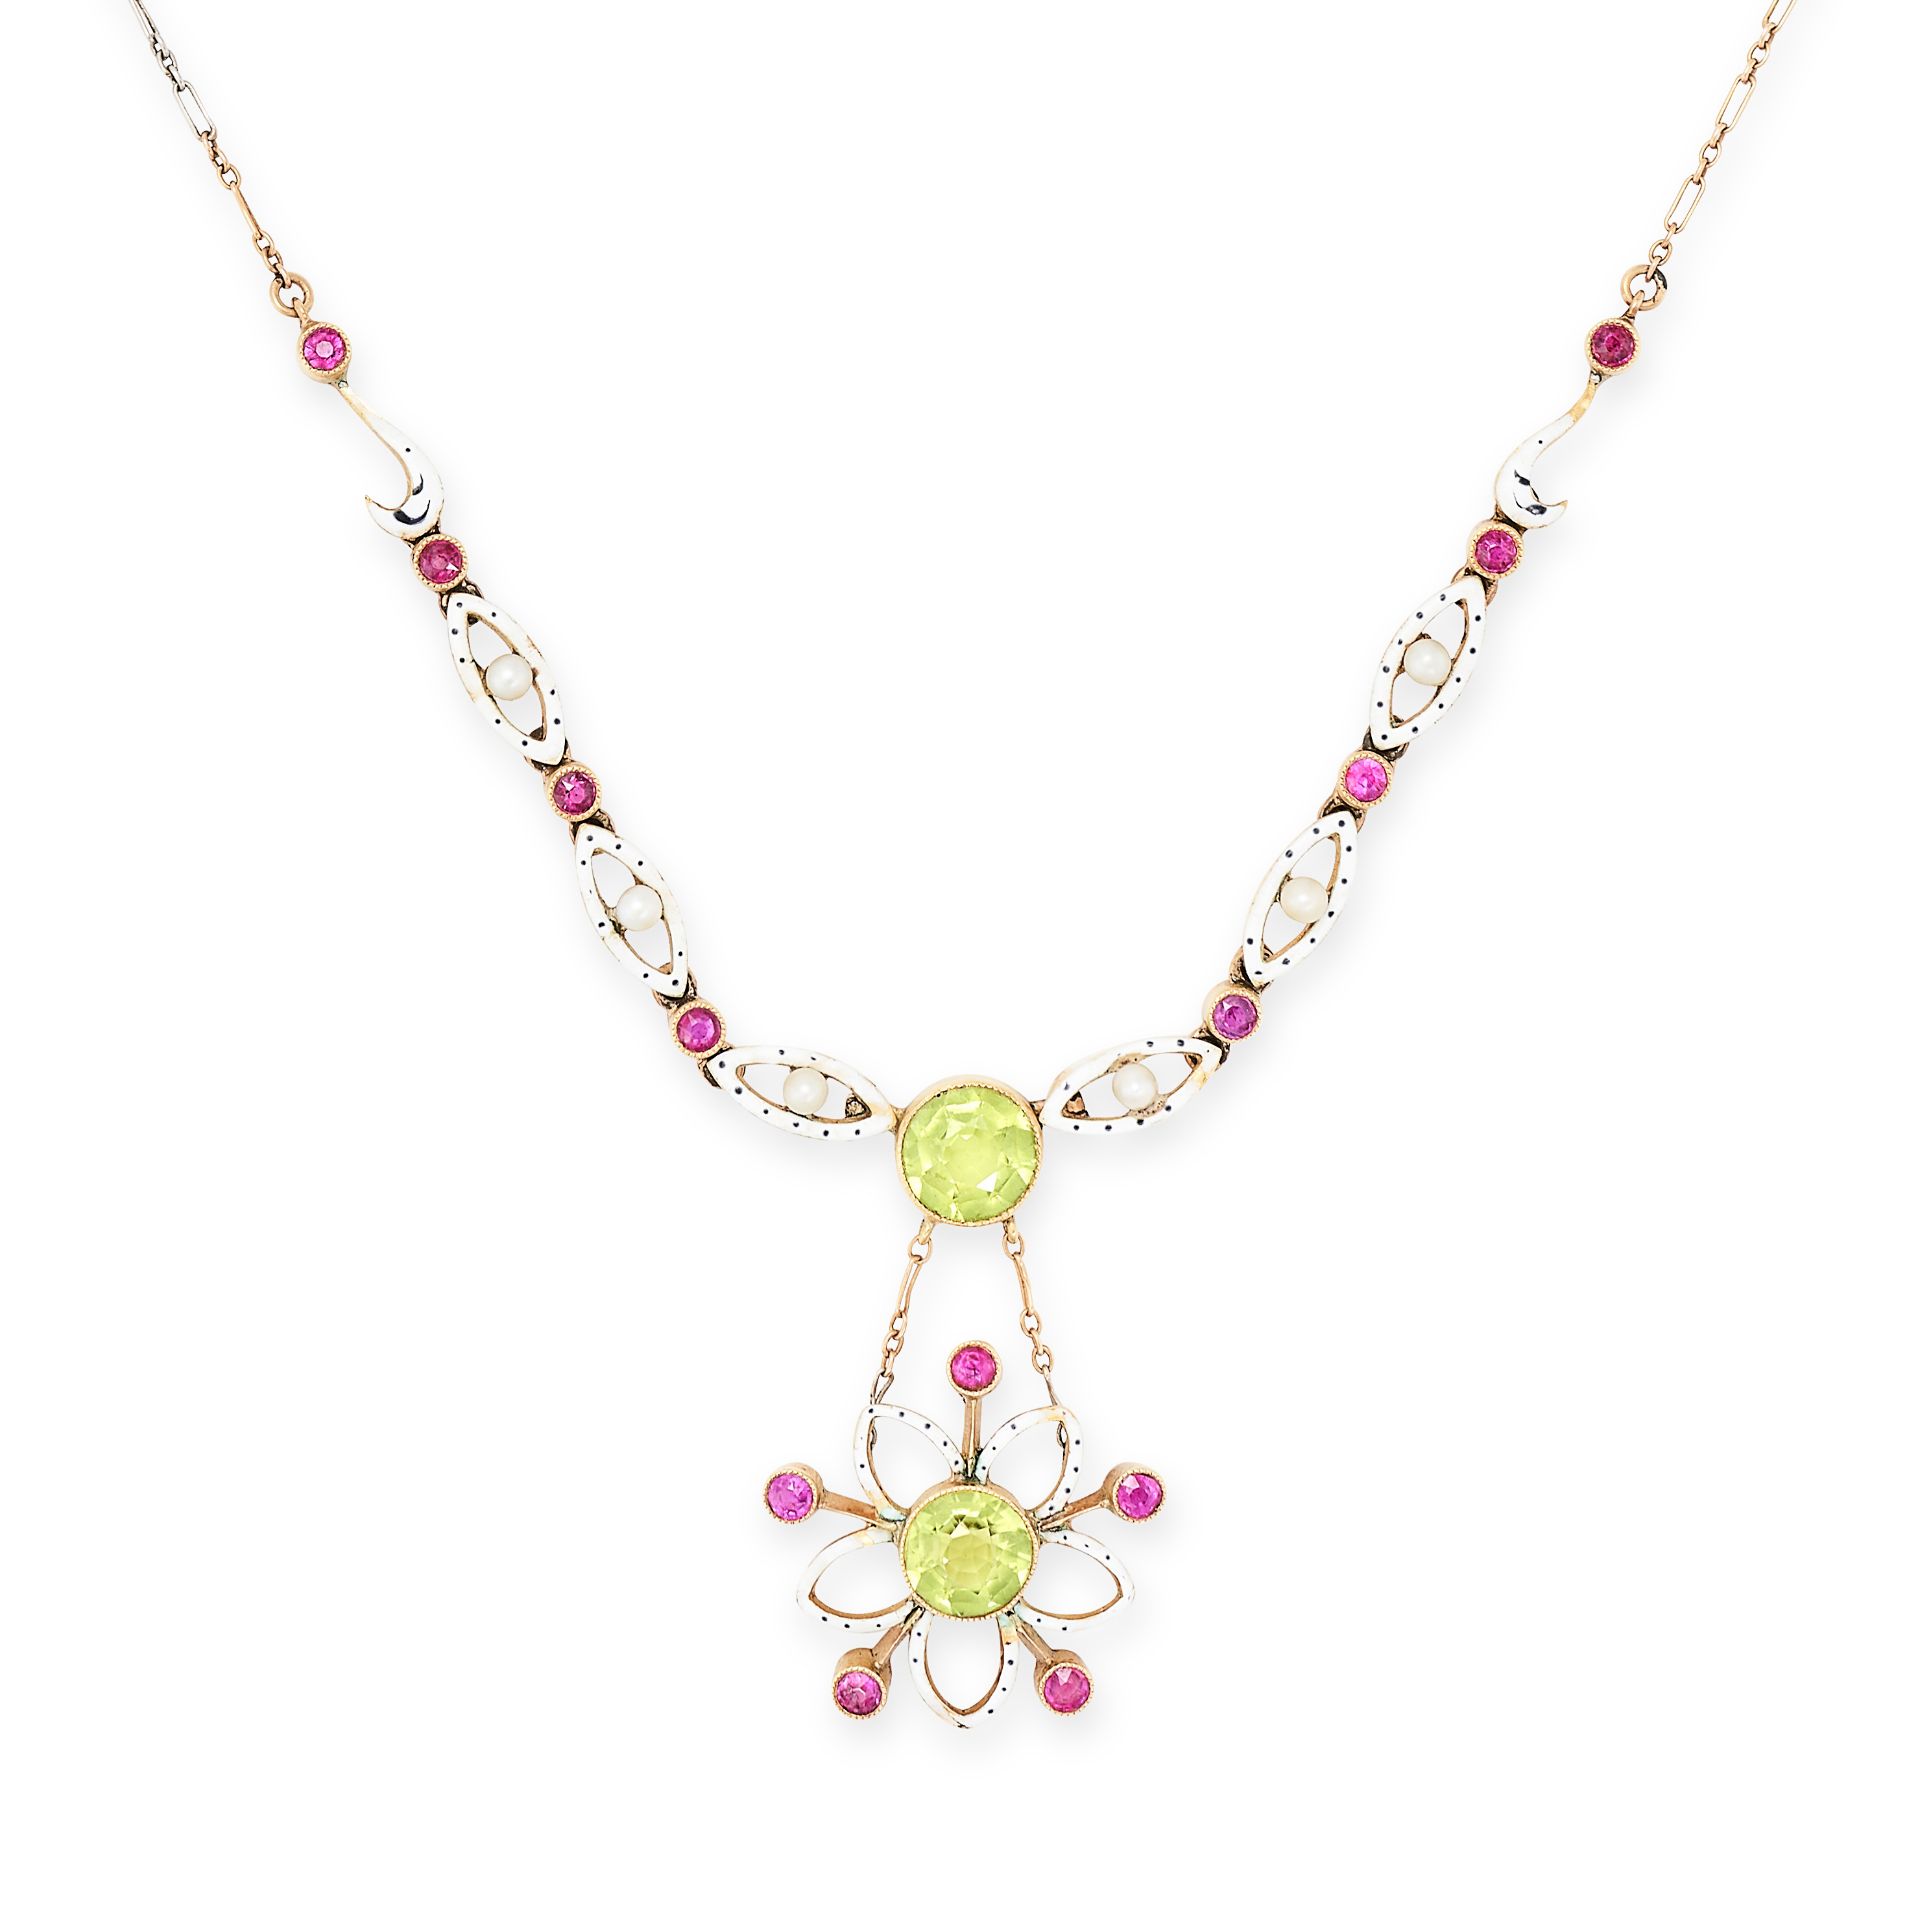 NO RESERVE - AN ANTIQUE PERIDOT, RUBY, PEARL AND ENAMEL NECKLACE in yellow gold, set with a centr...